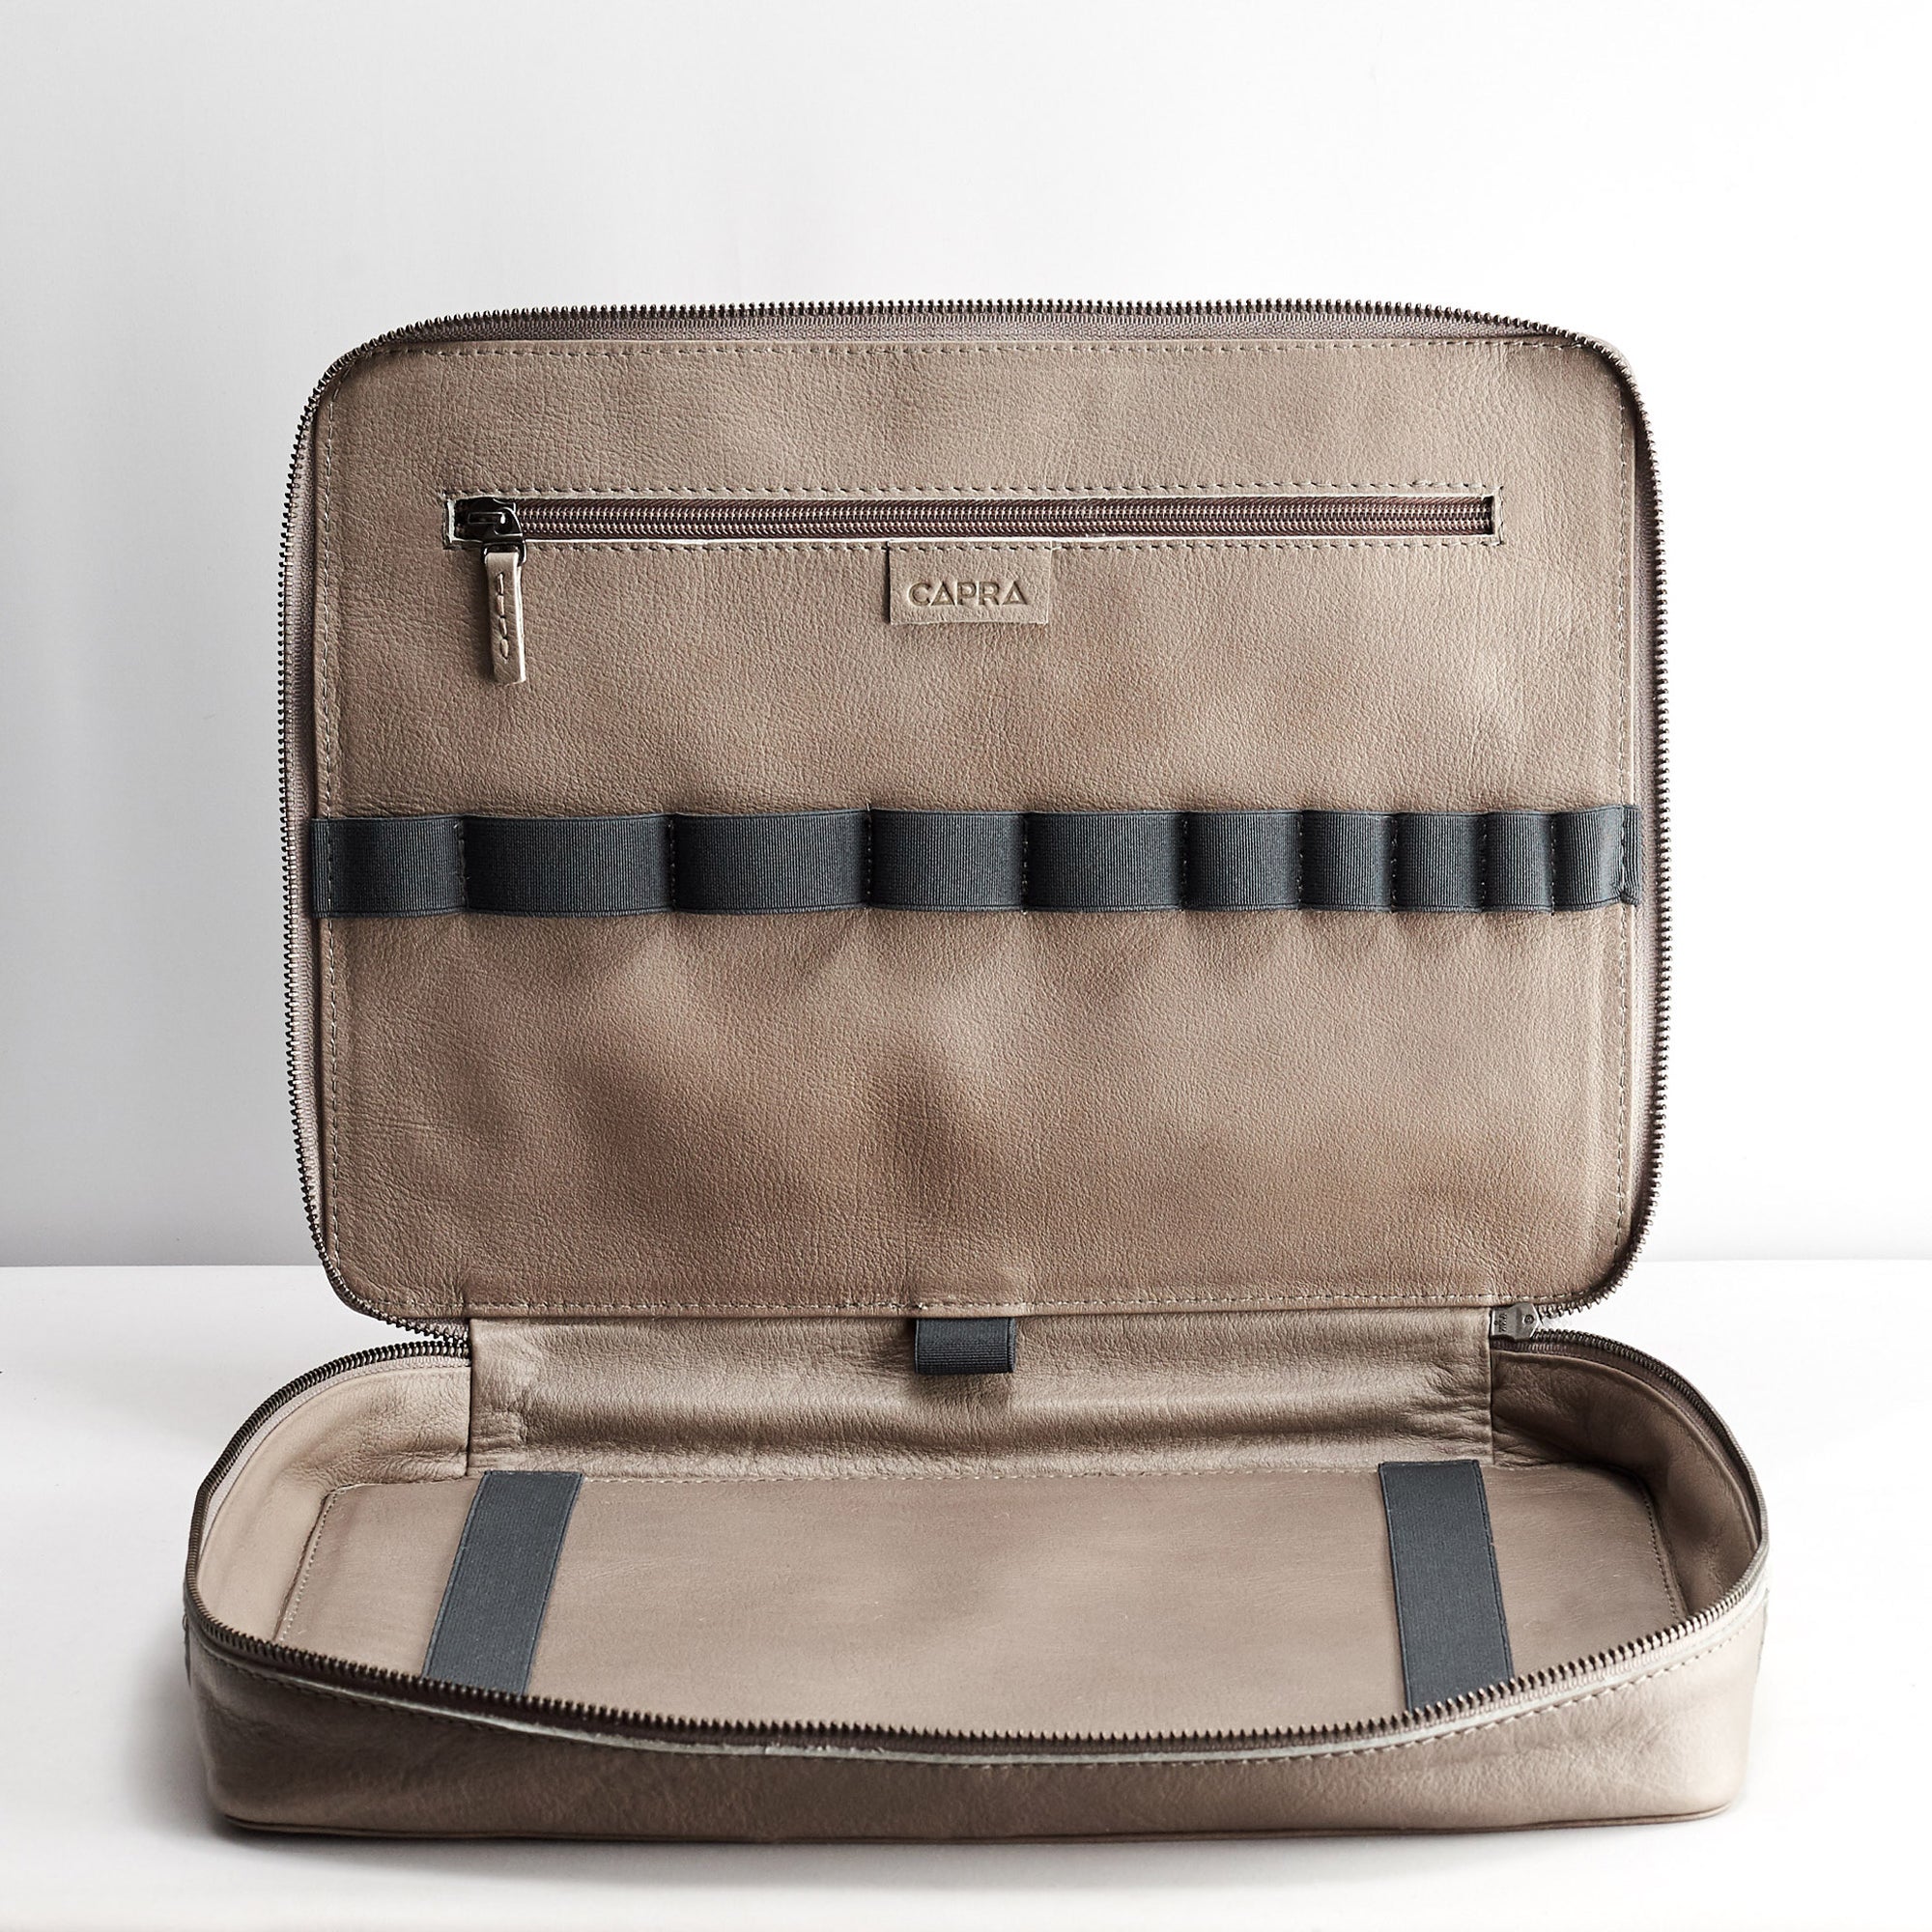 Travel electronics organizer with leather interior. Grey large tech pouch by Capra Leather